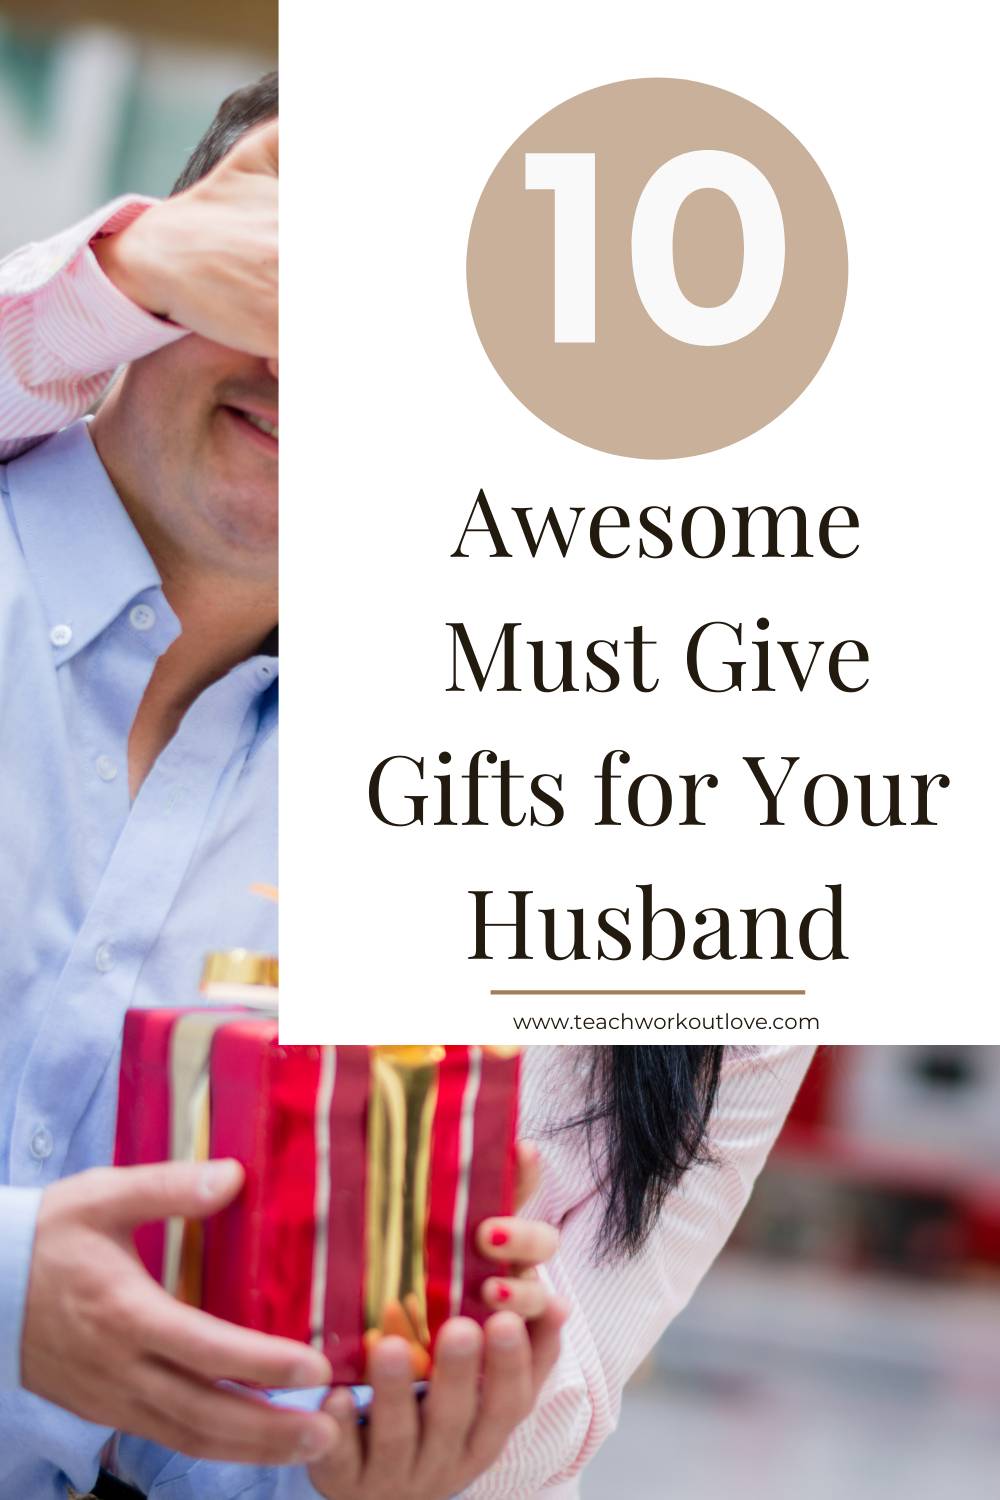 Sometimes it can be hard to get creative when it comes to gift ideas for your husband. Here are 10 ingenious birthday gift ideas to surprise your partner.